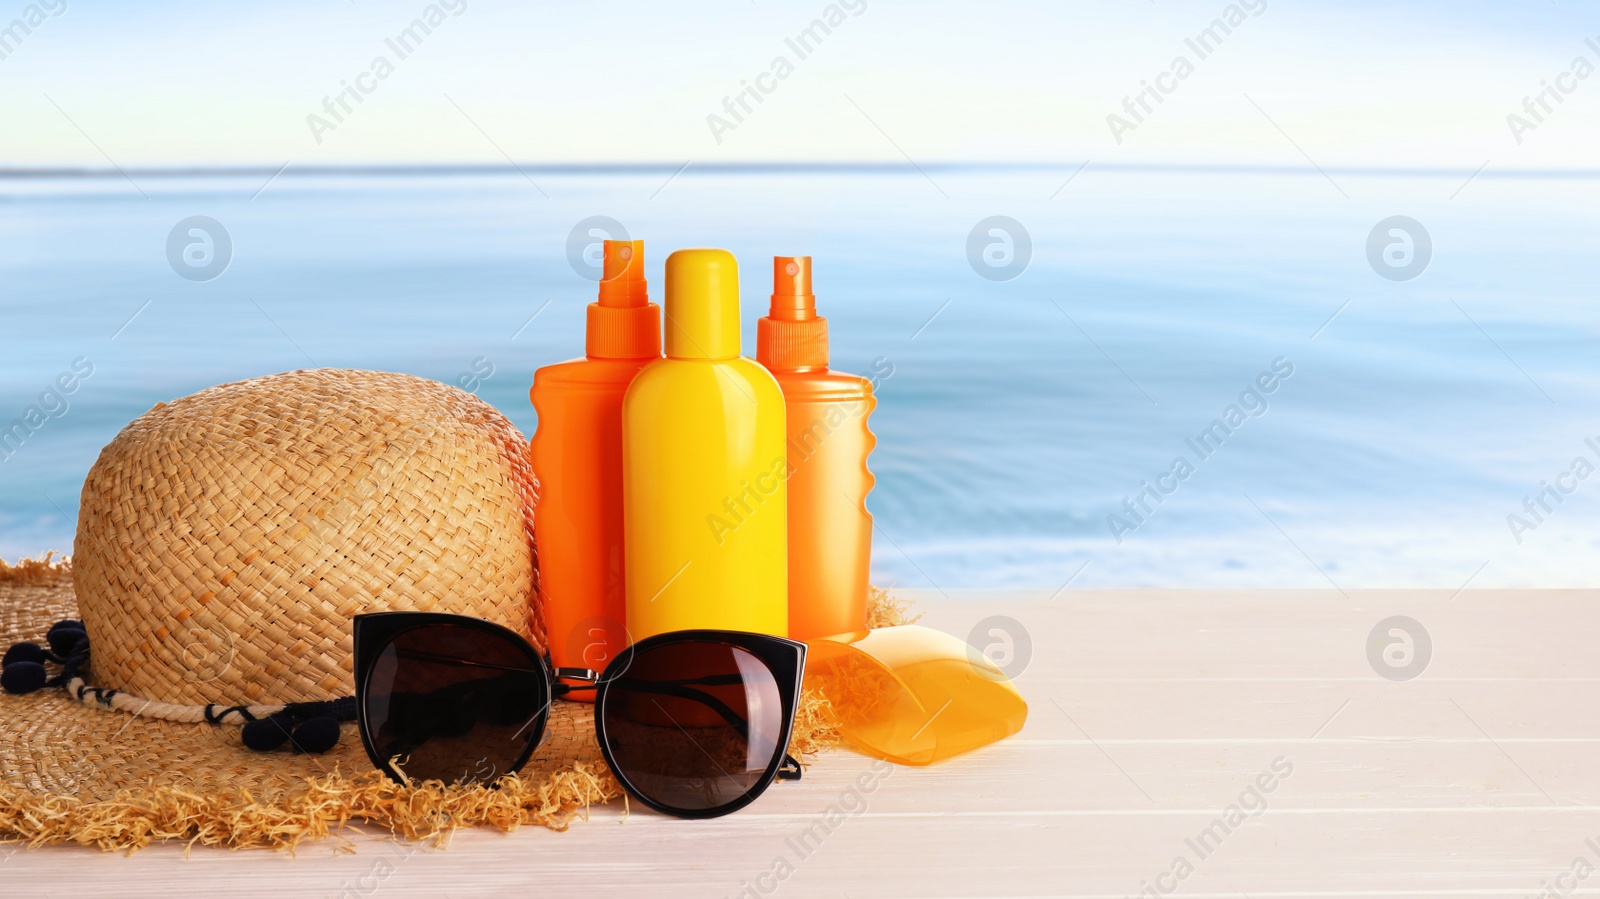 Image of Set of sun protection products and stylish accessories on wooden table near sea. Space for text